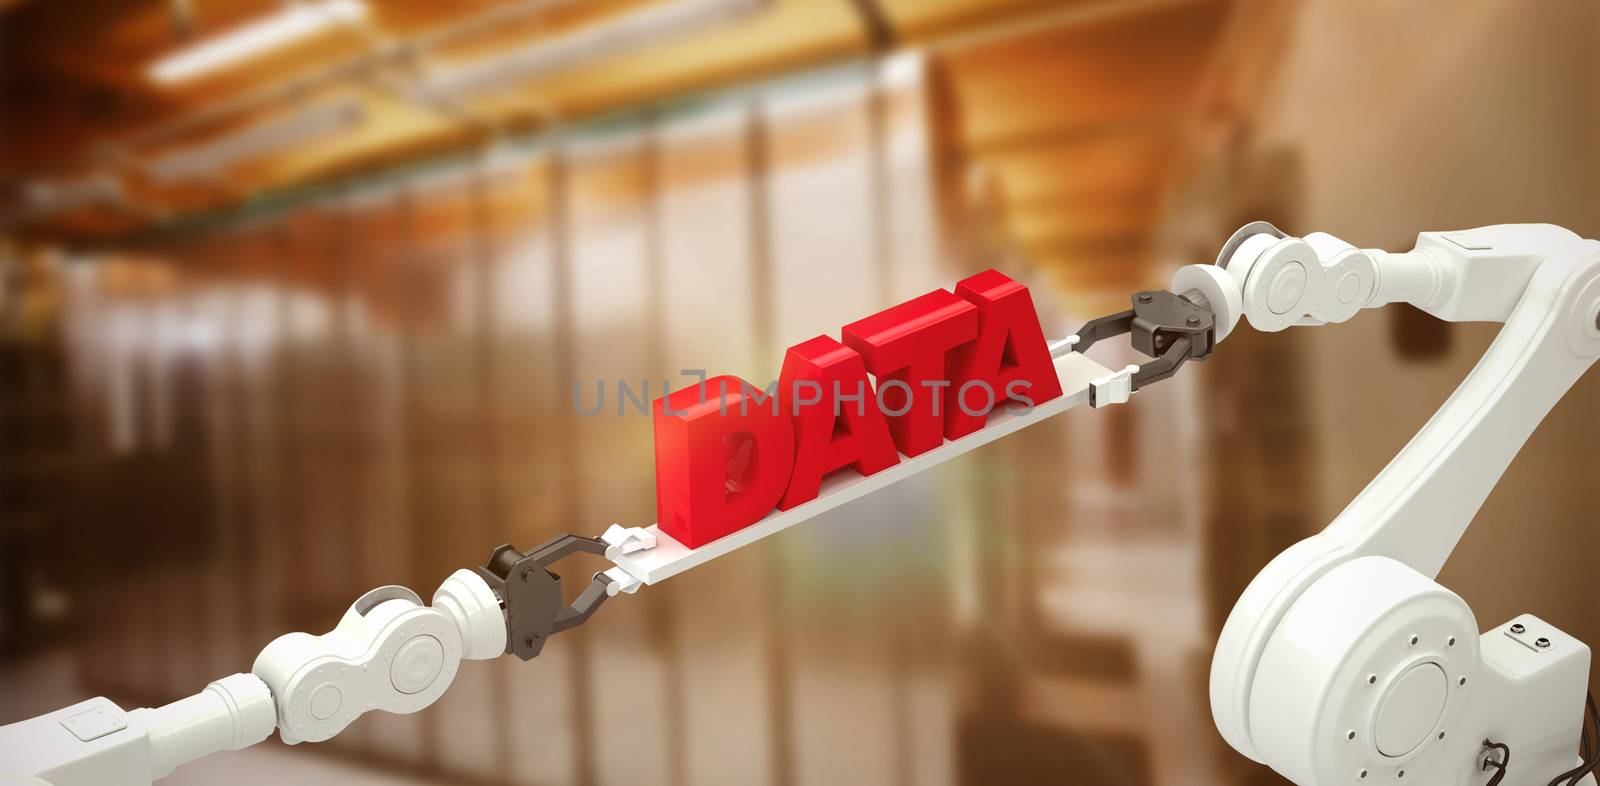 Robotic hands holding red data message over white background against image of data storage